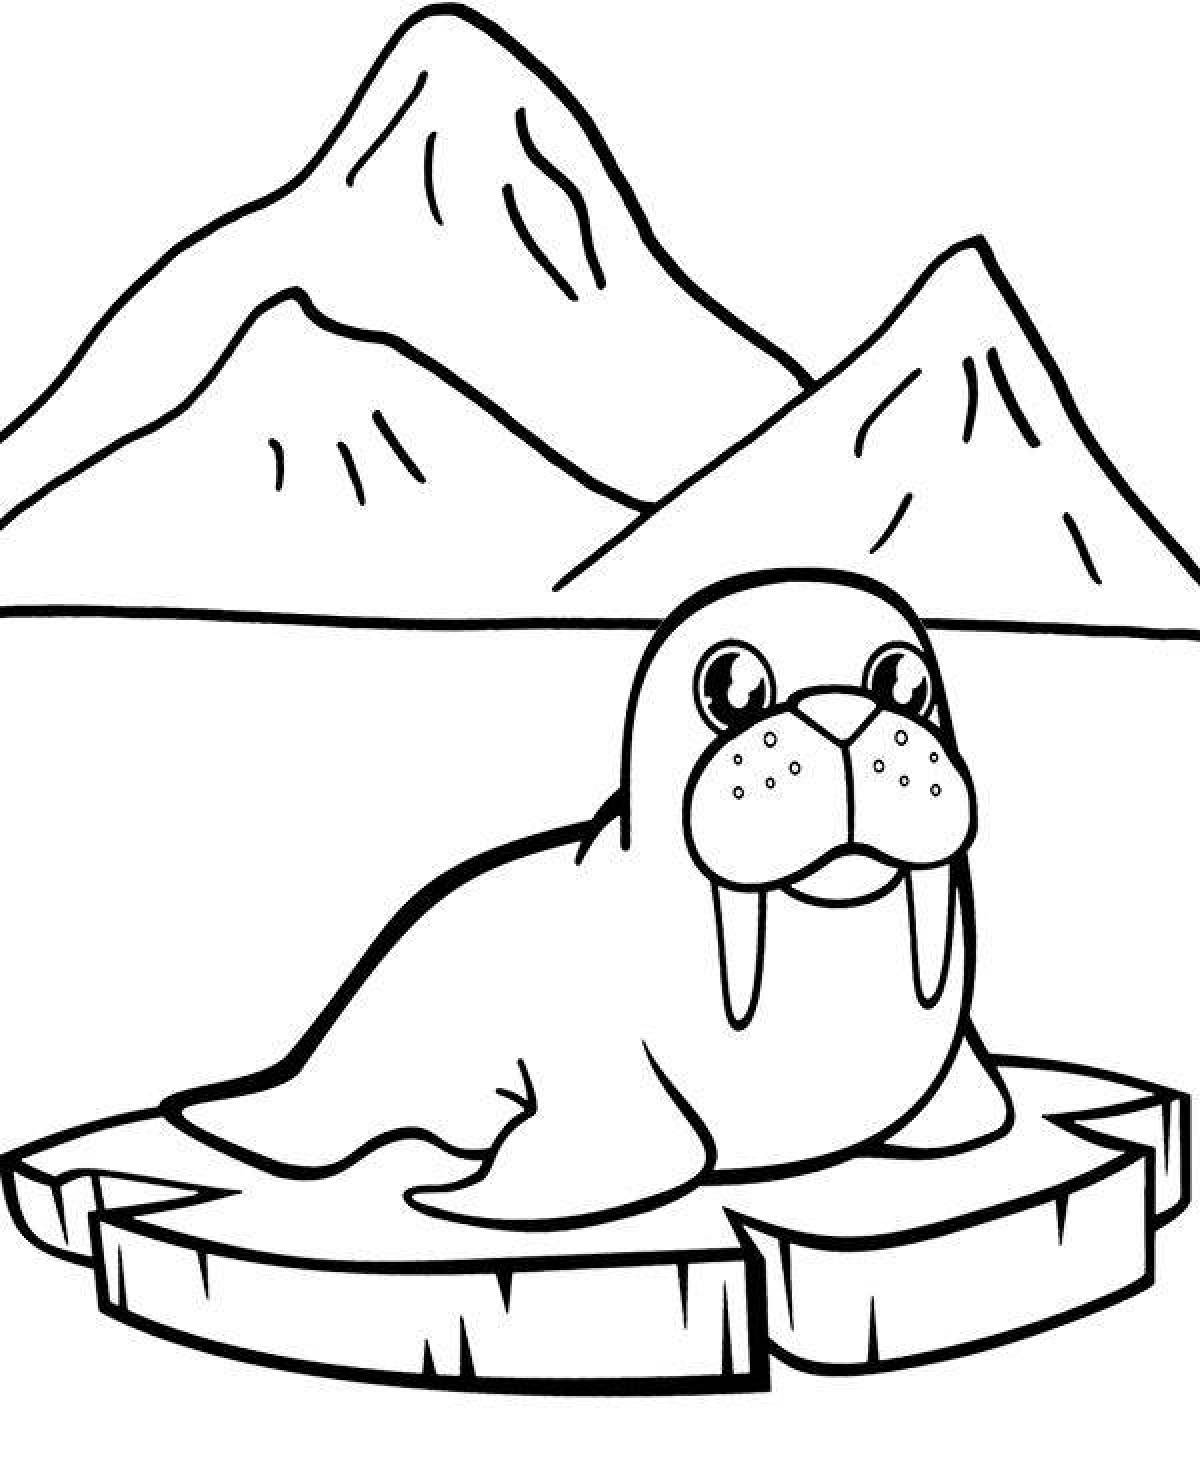 Coloring page funny penguin on ice